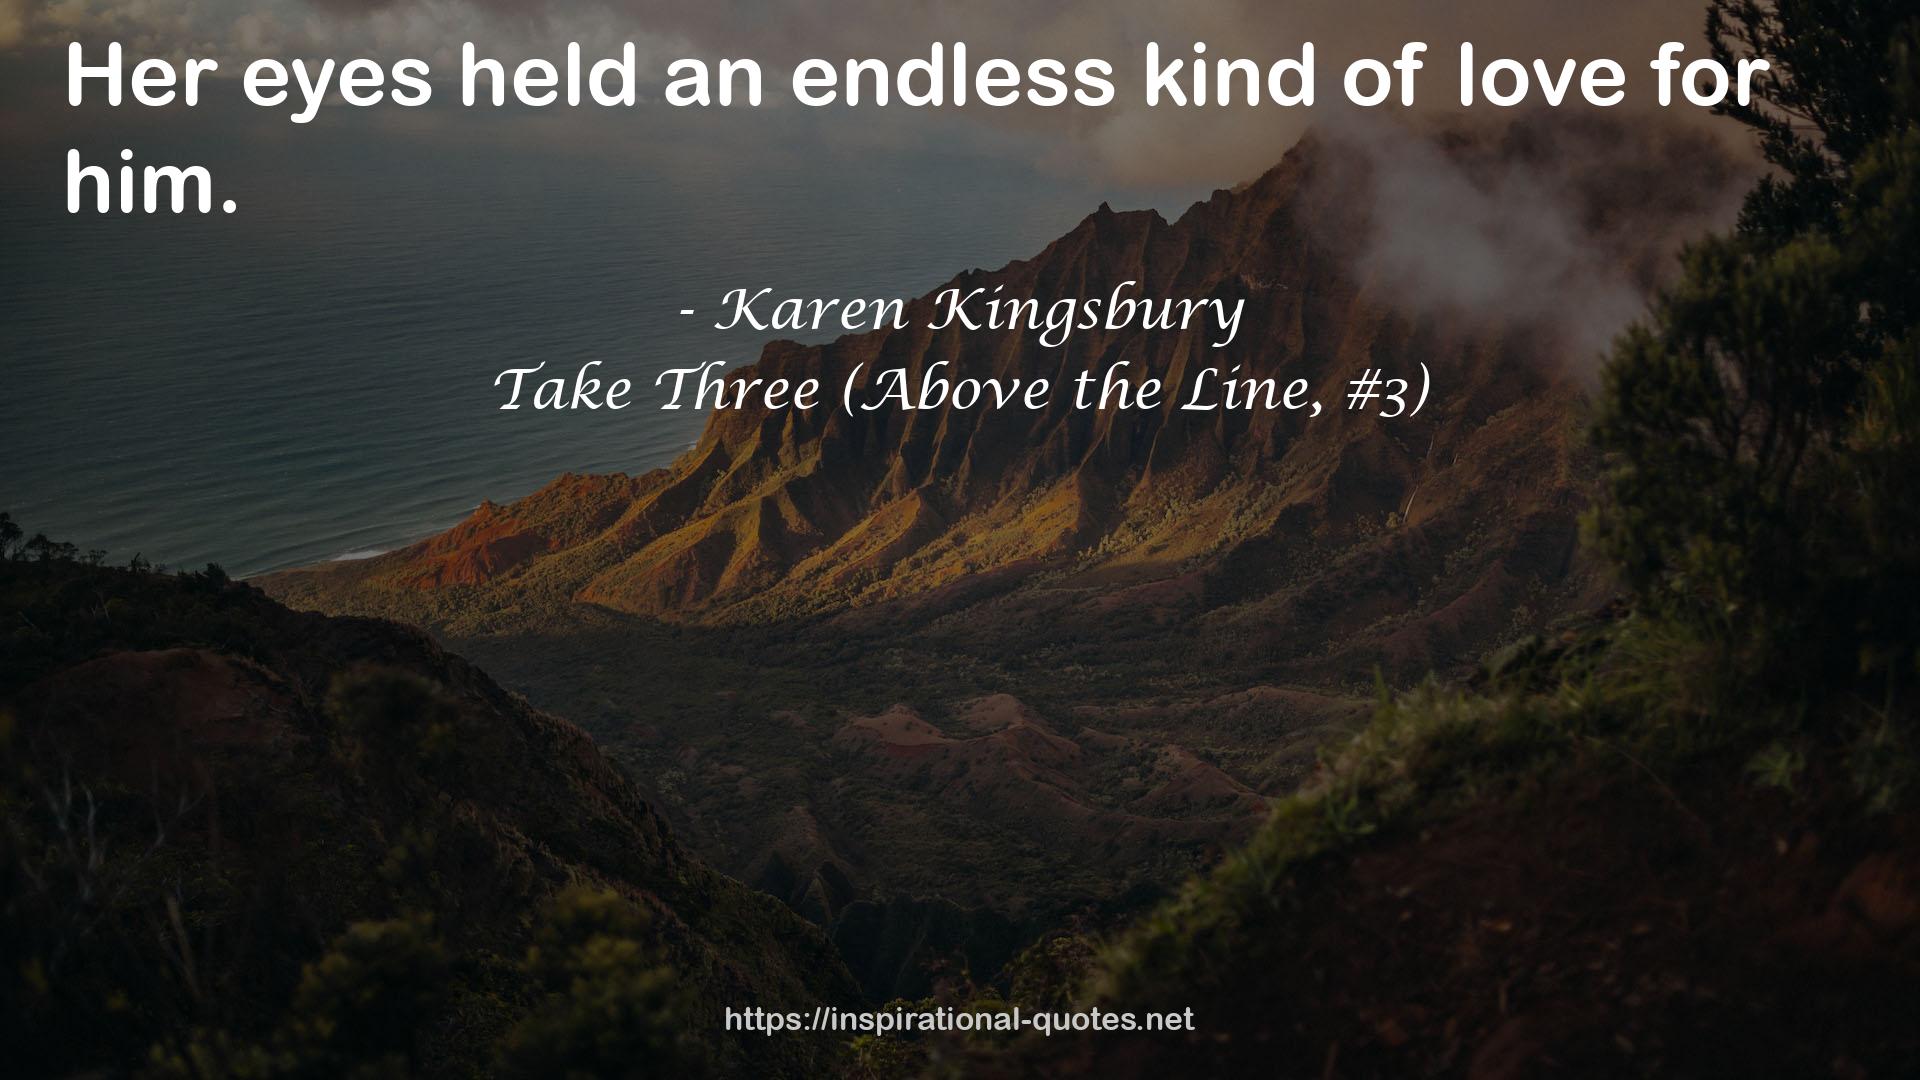 Take Three (Above the Line, #3) QUOTES